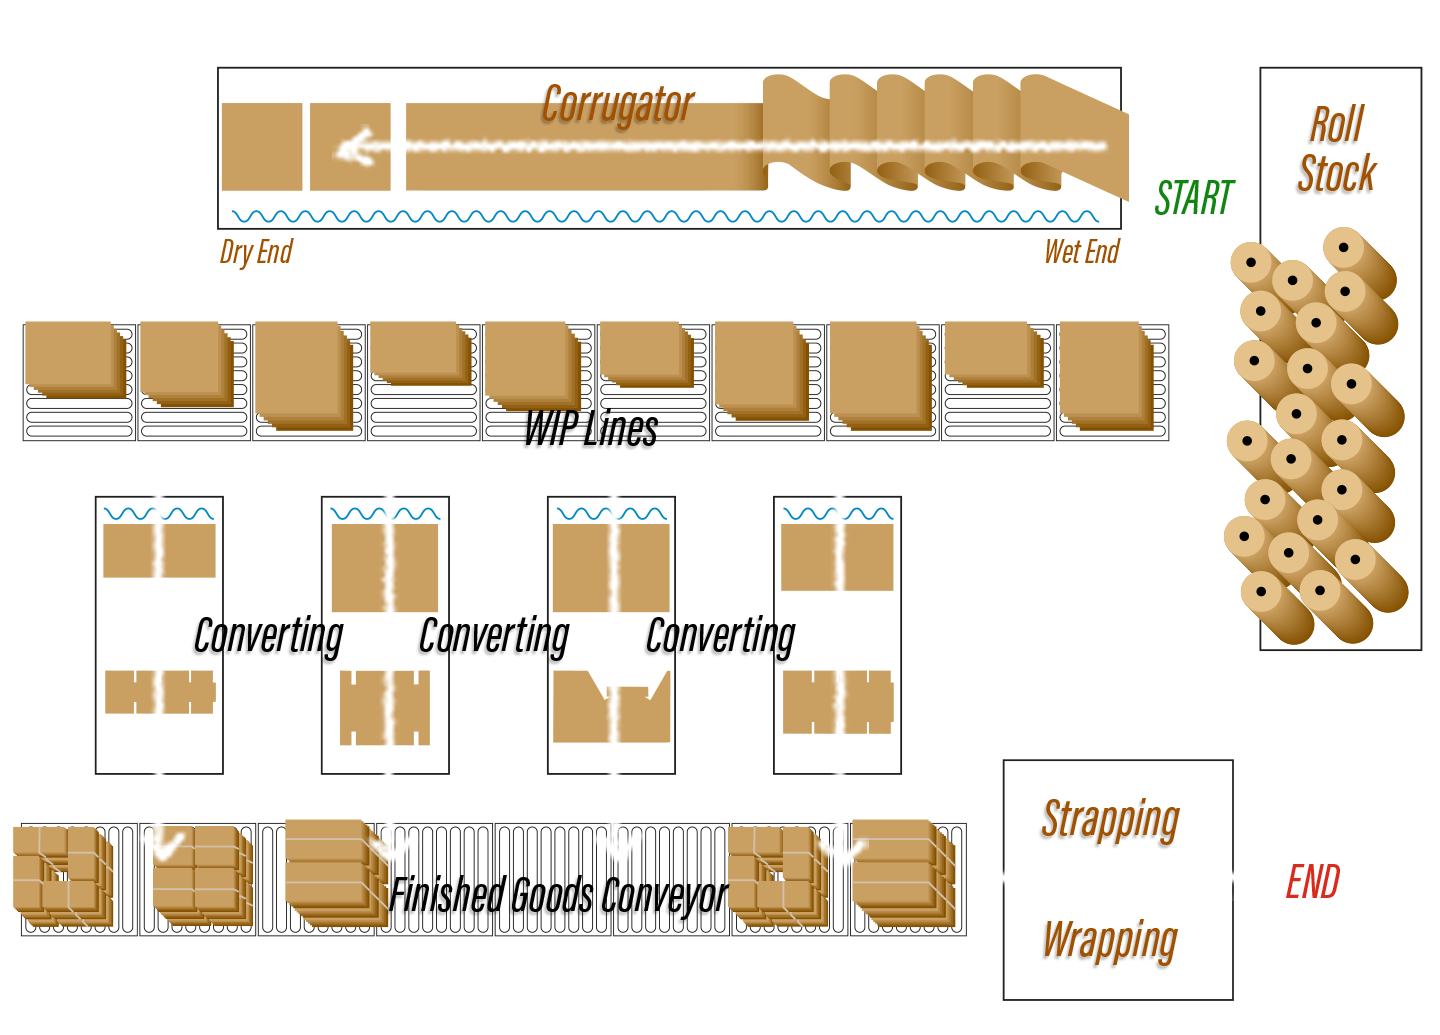 schematic of a box plant layout showing the perpendicular process